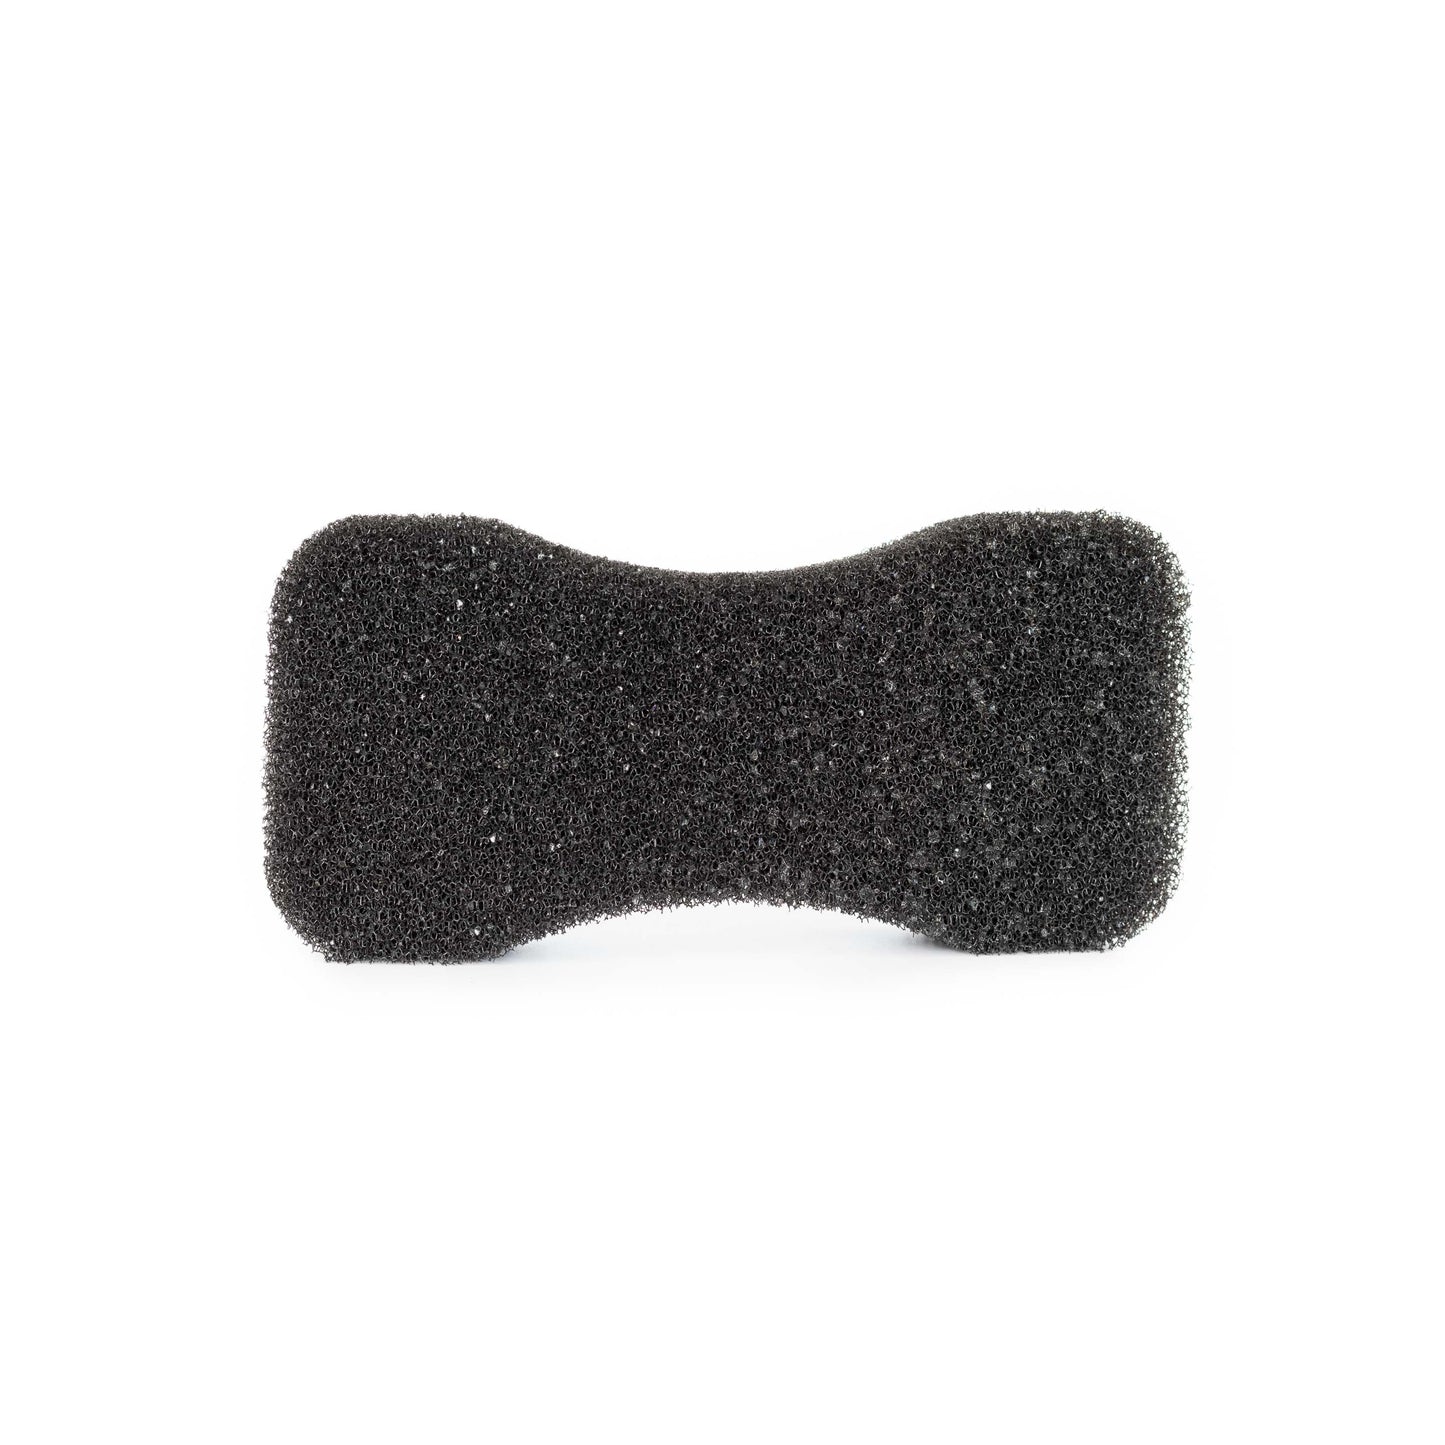 A photo of the Hairy Pony Compressed Scrubbing Horse Sponge after expanding with water. A black, coarse sponge on a white background.